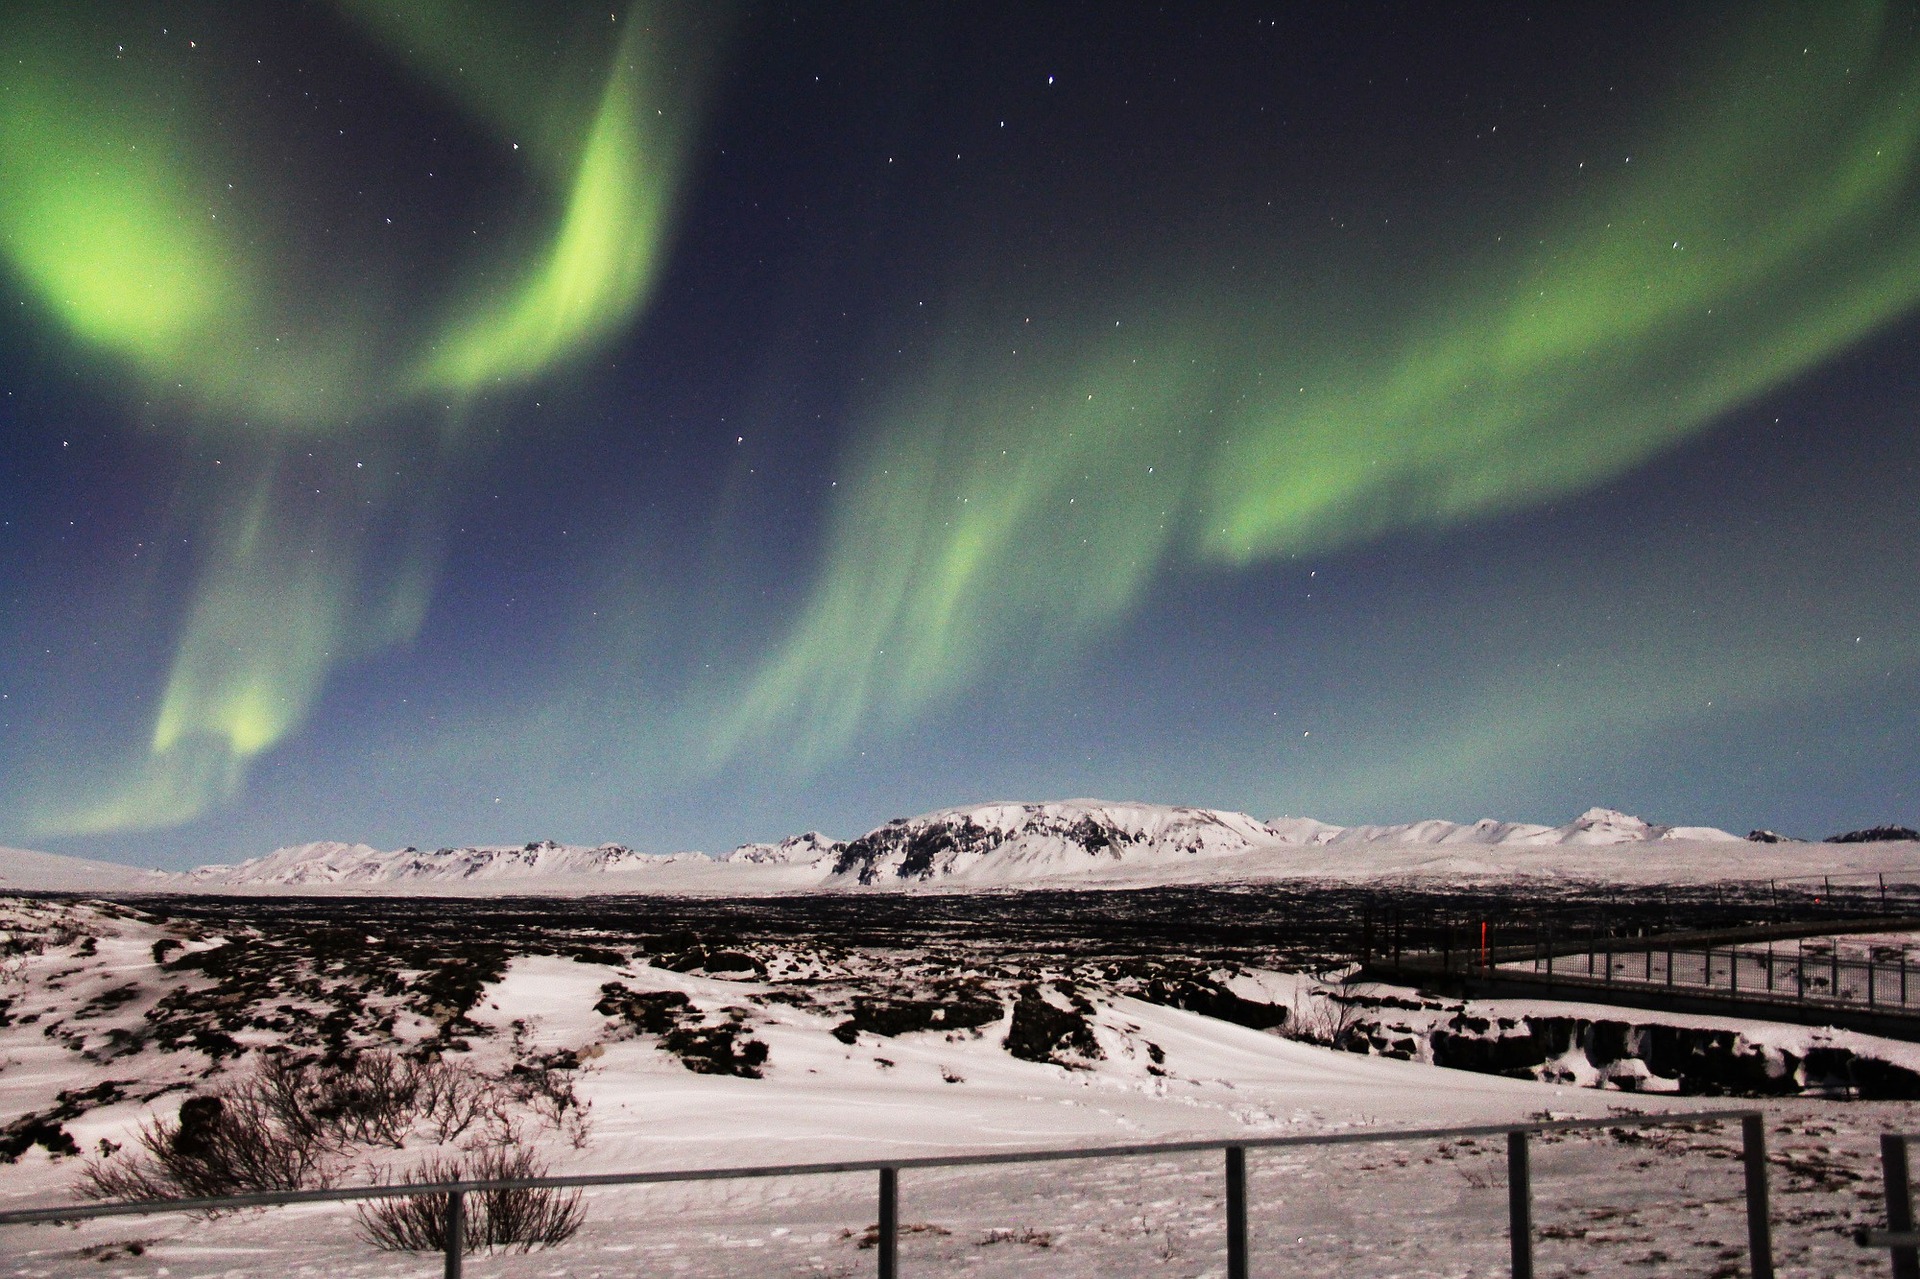 Discover the amazing Northern Lights in Iceland